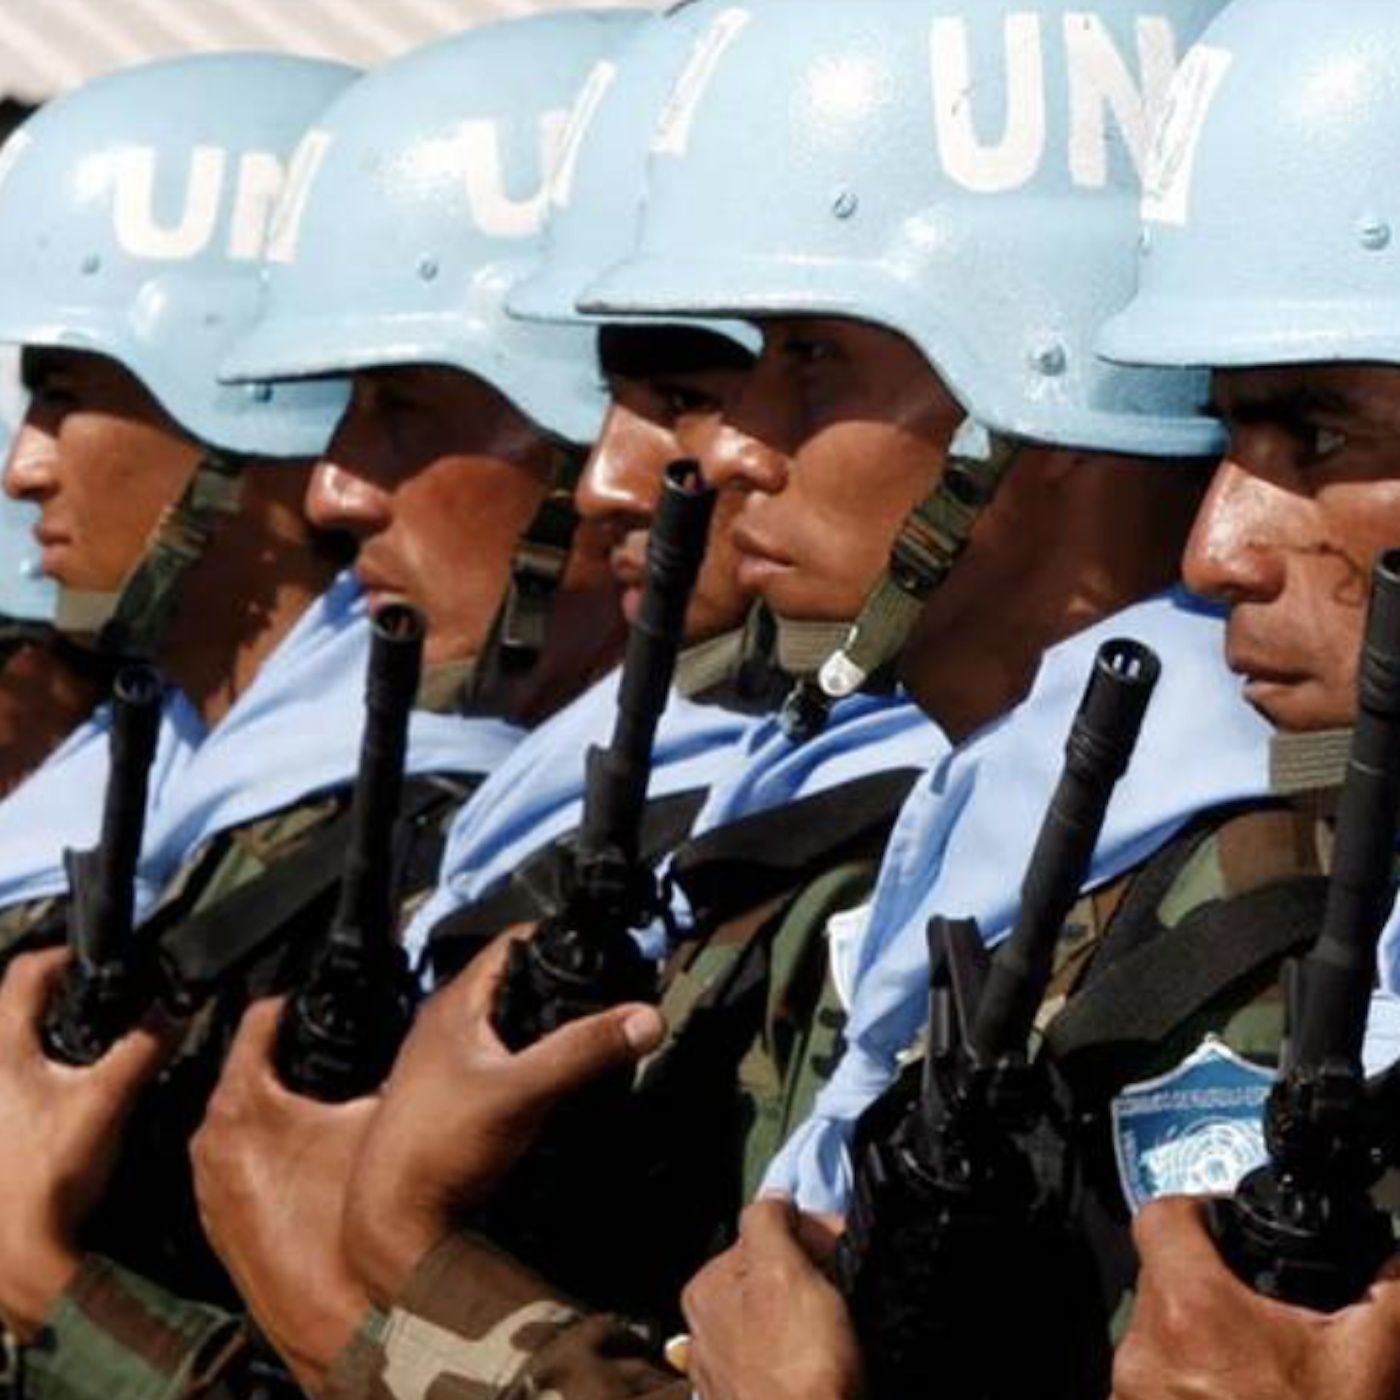 UN Troops, Plandemic Treaty, and much more!